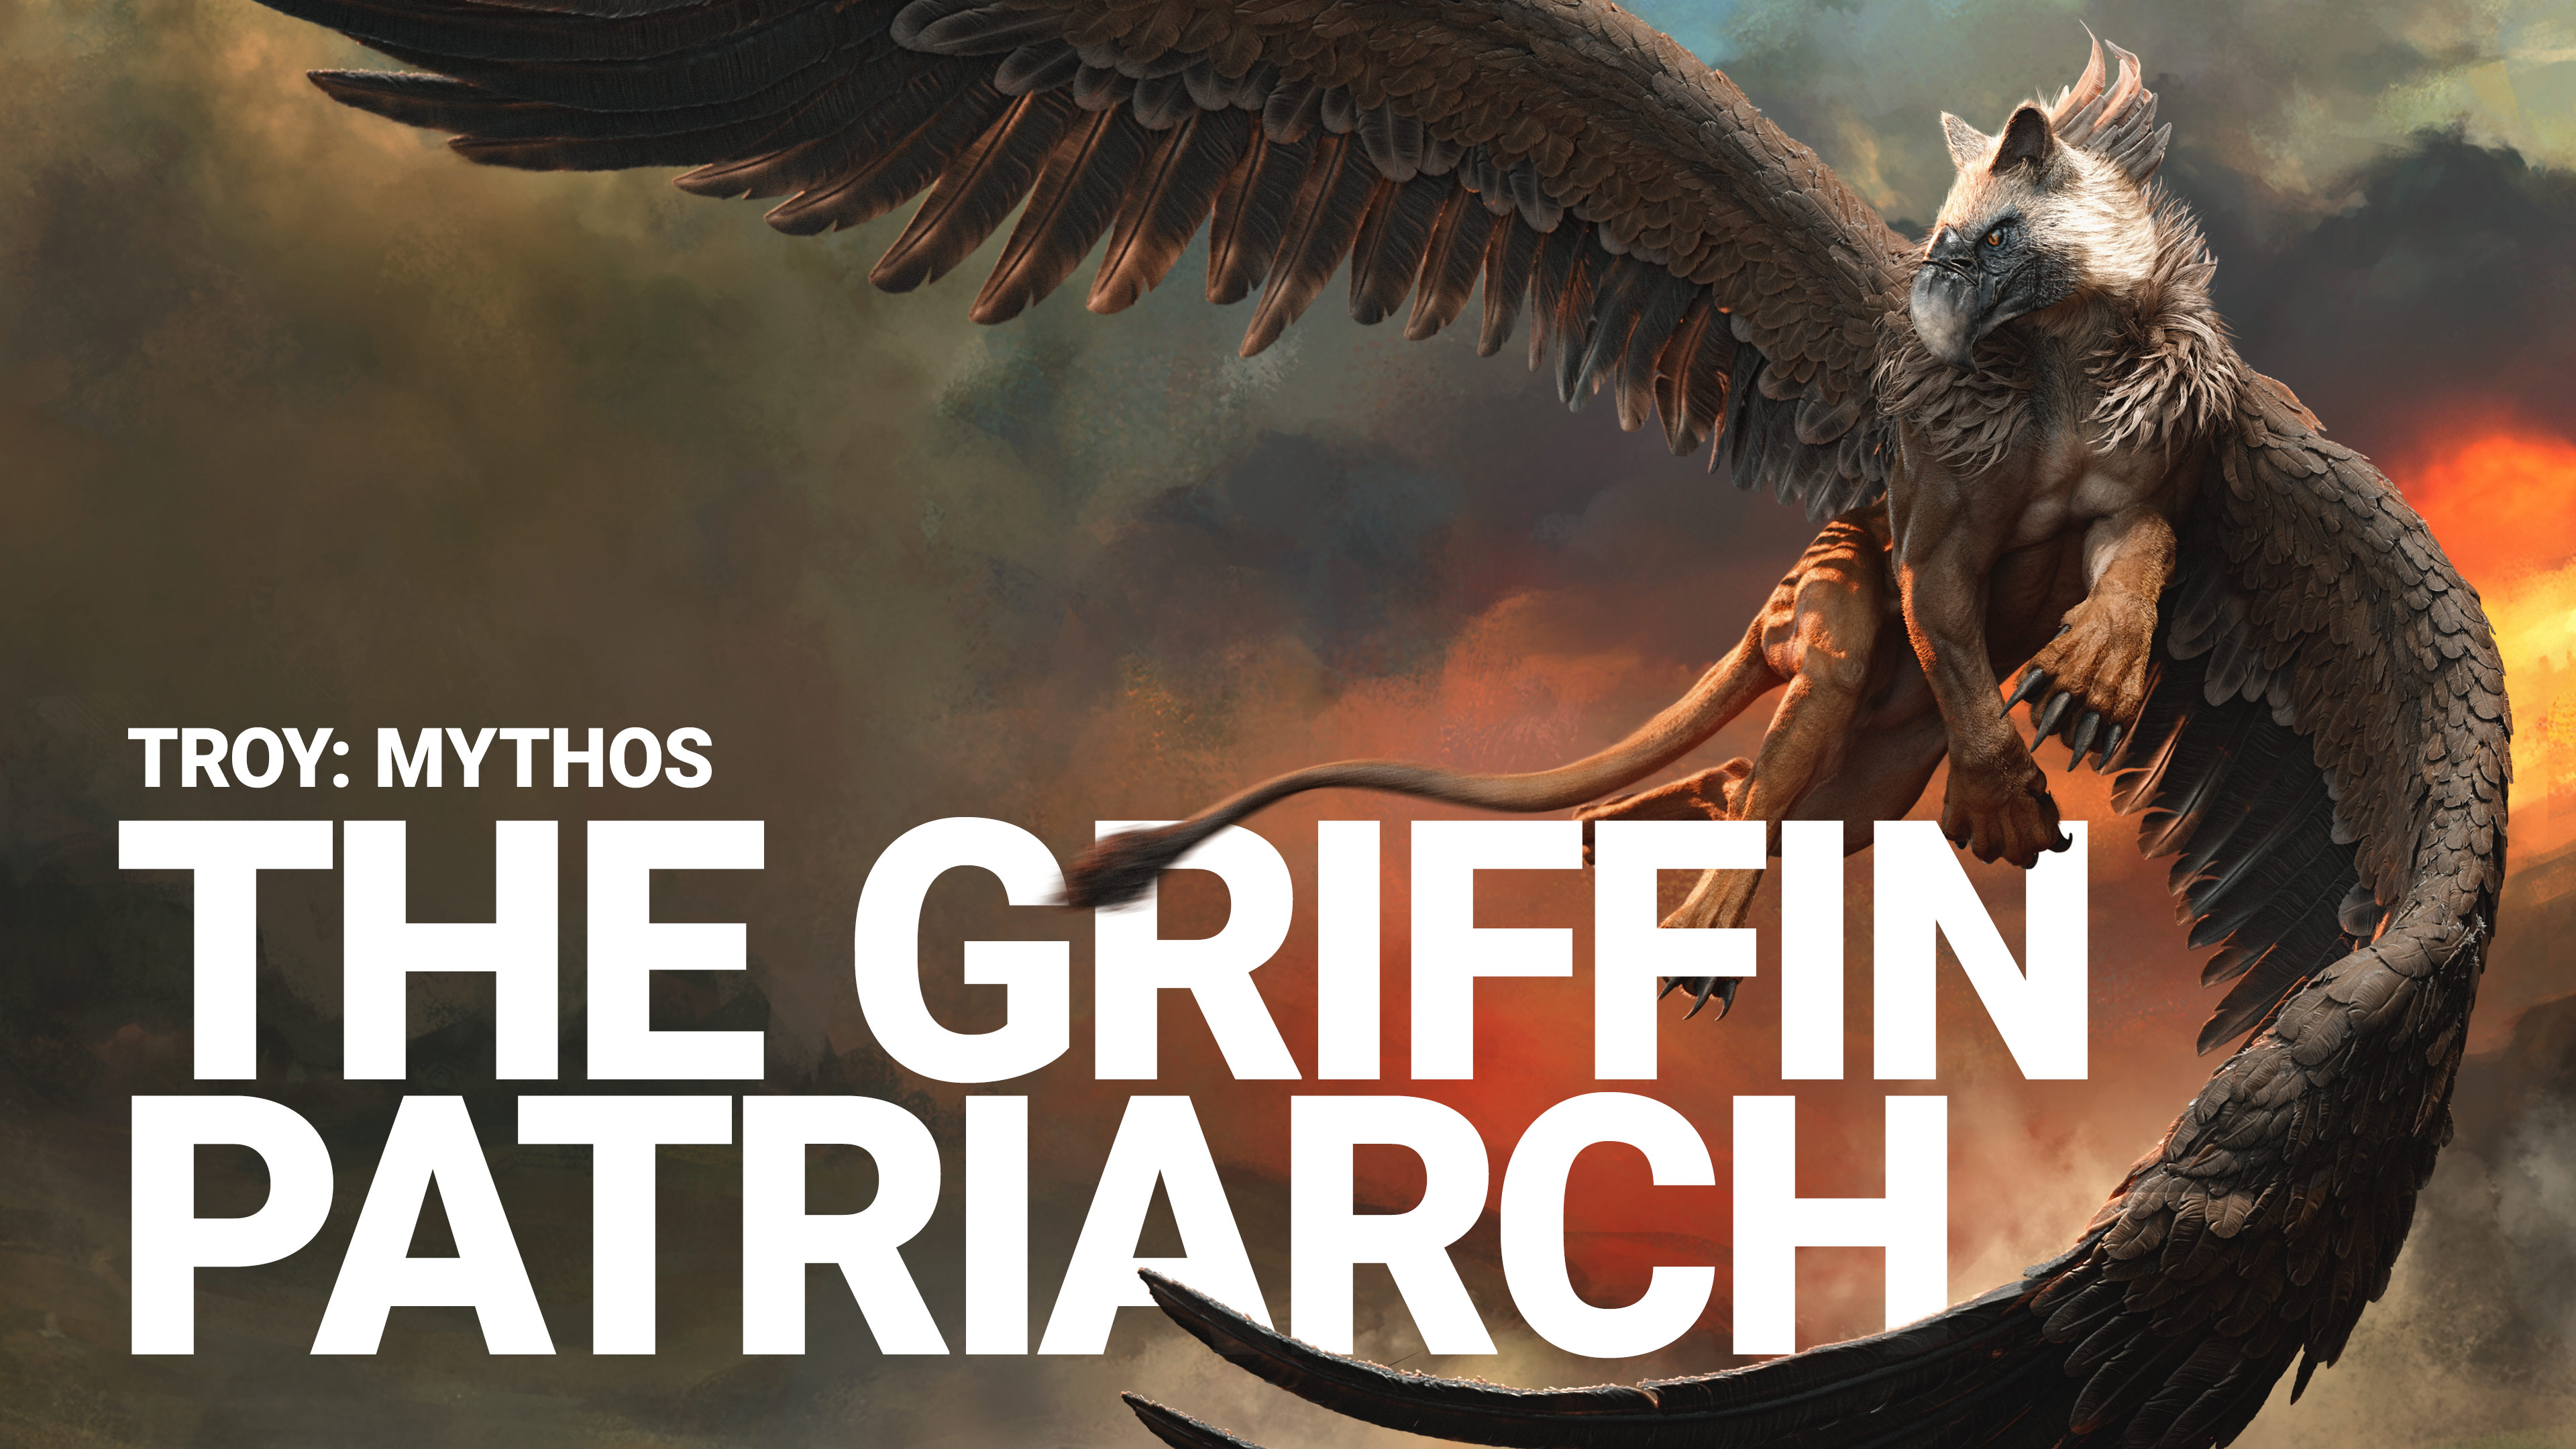 The Winged Warrior Series: Name and Place Pronunciation - Griffin